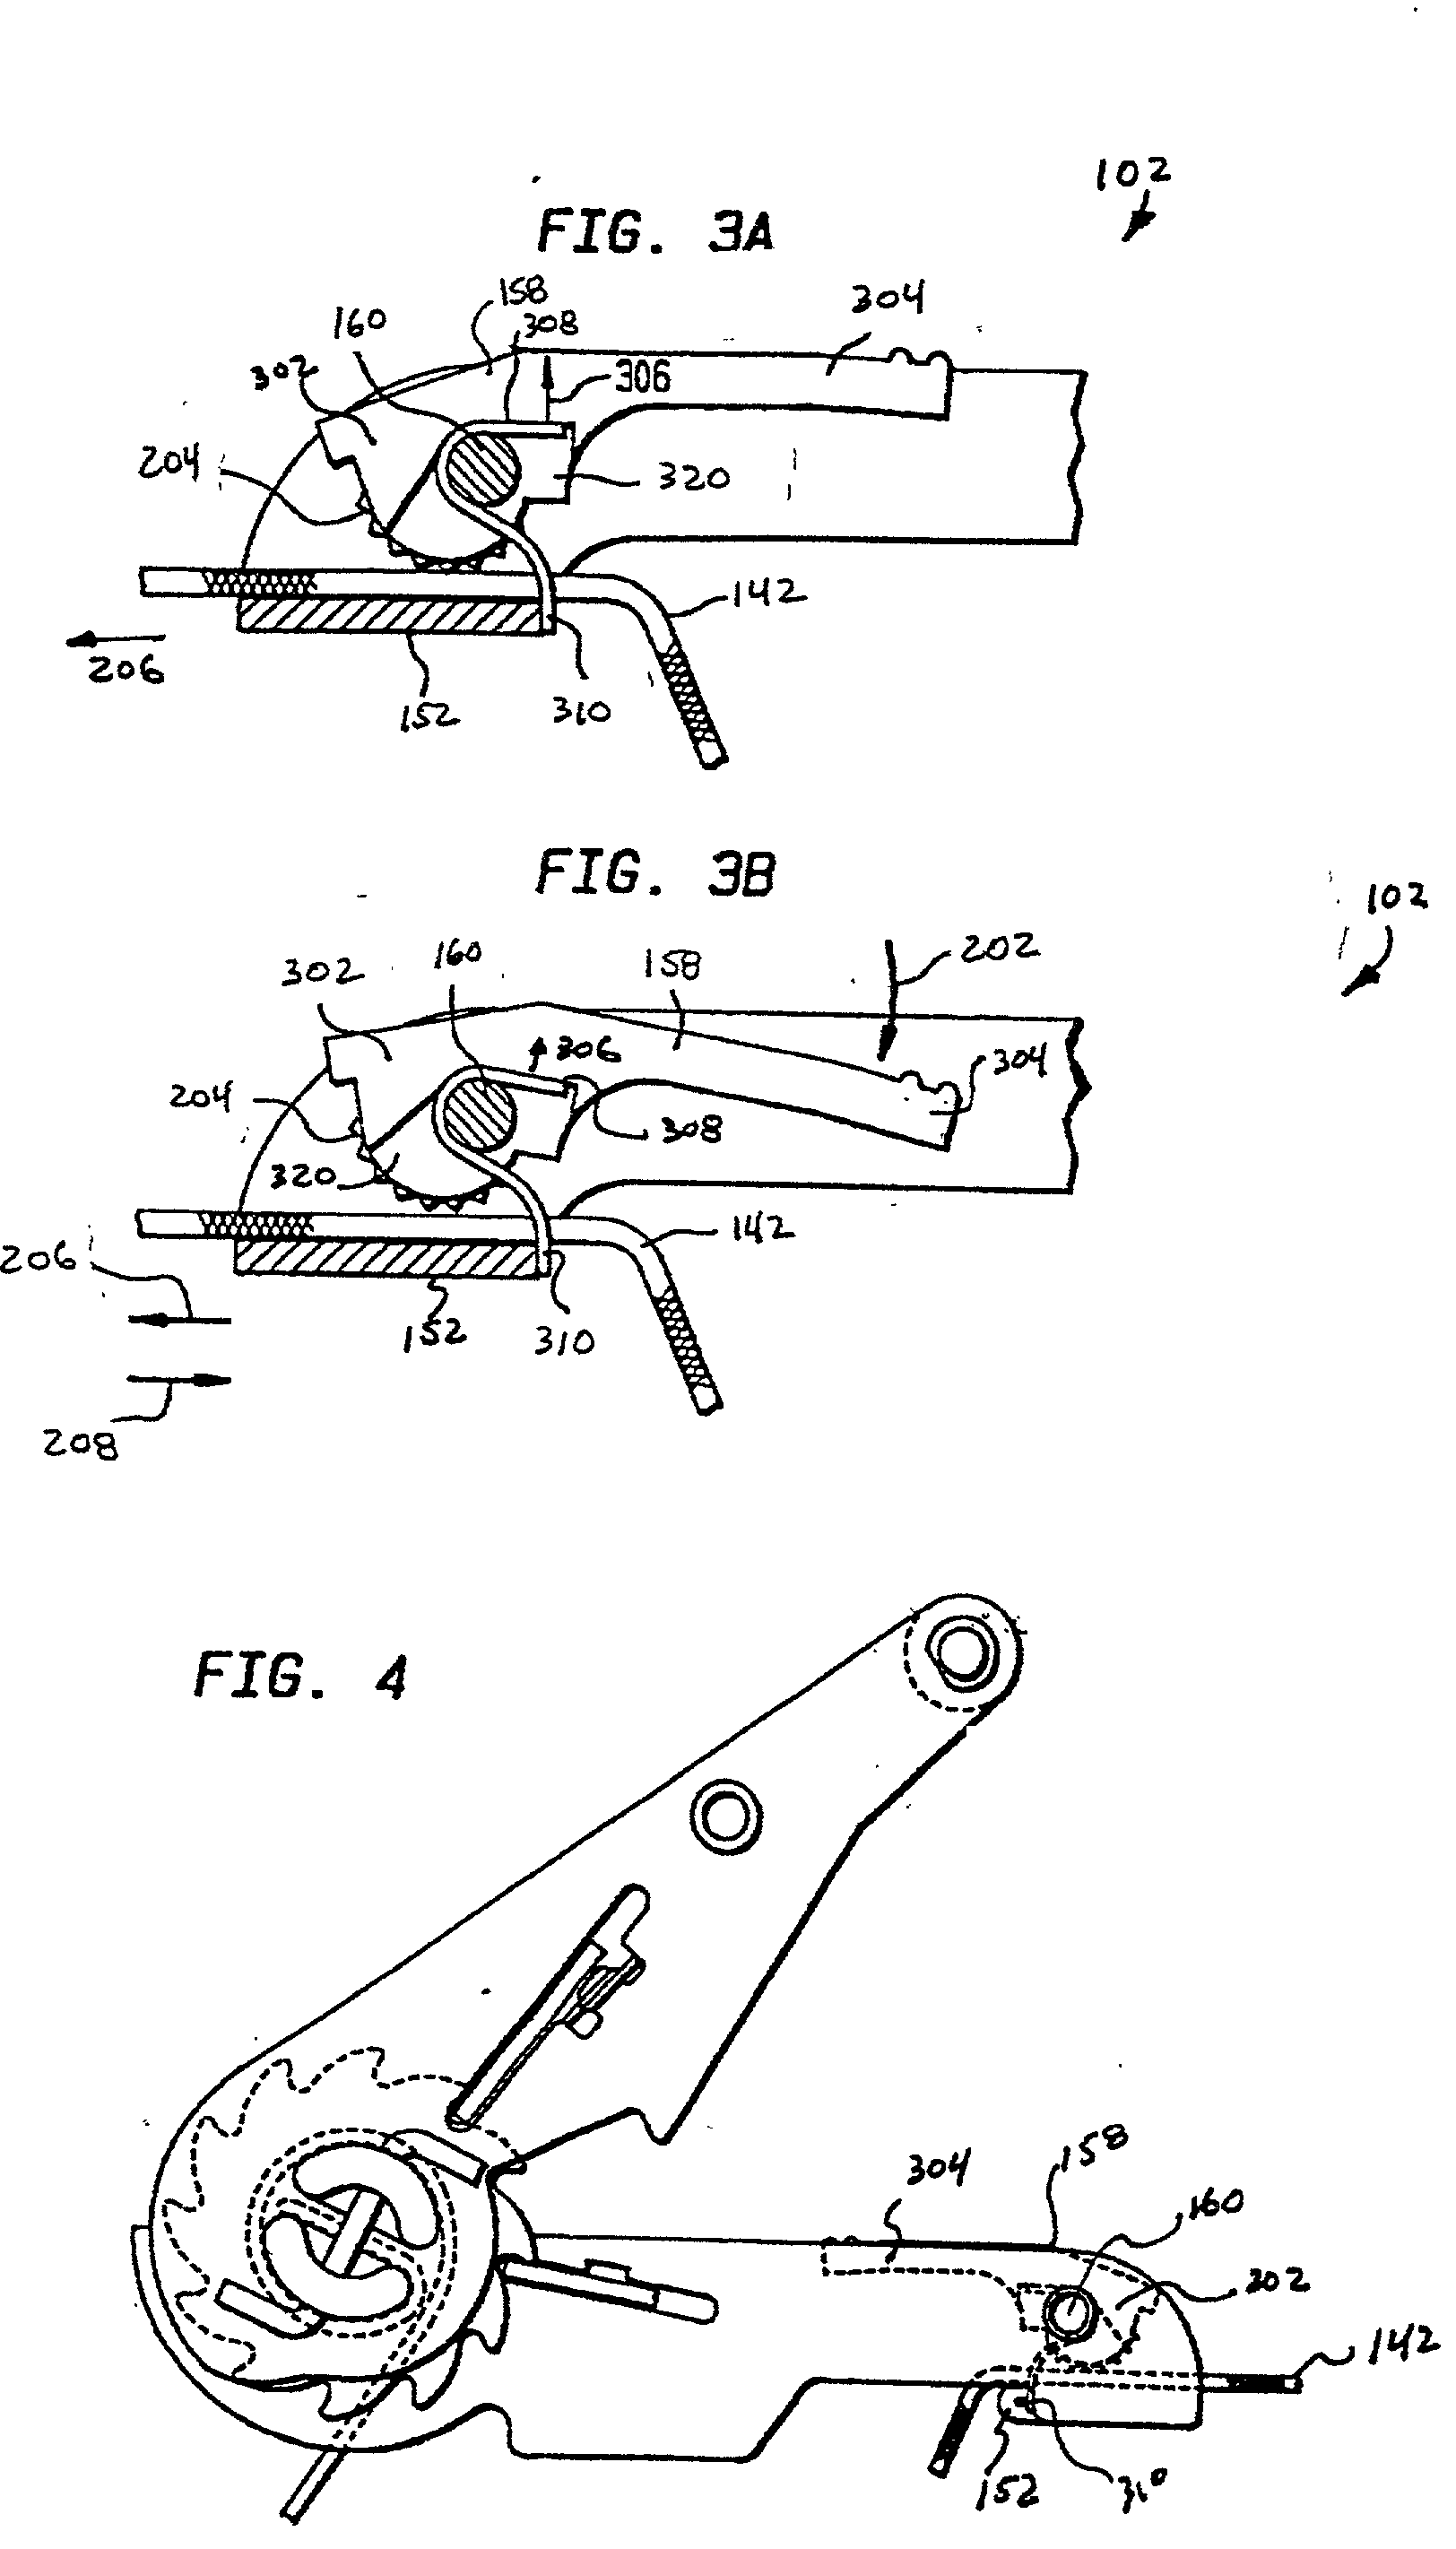 Ratchet and cam buckle tensioning assembly and method for using same